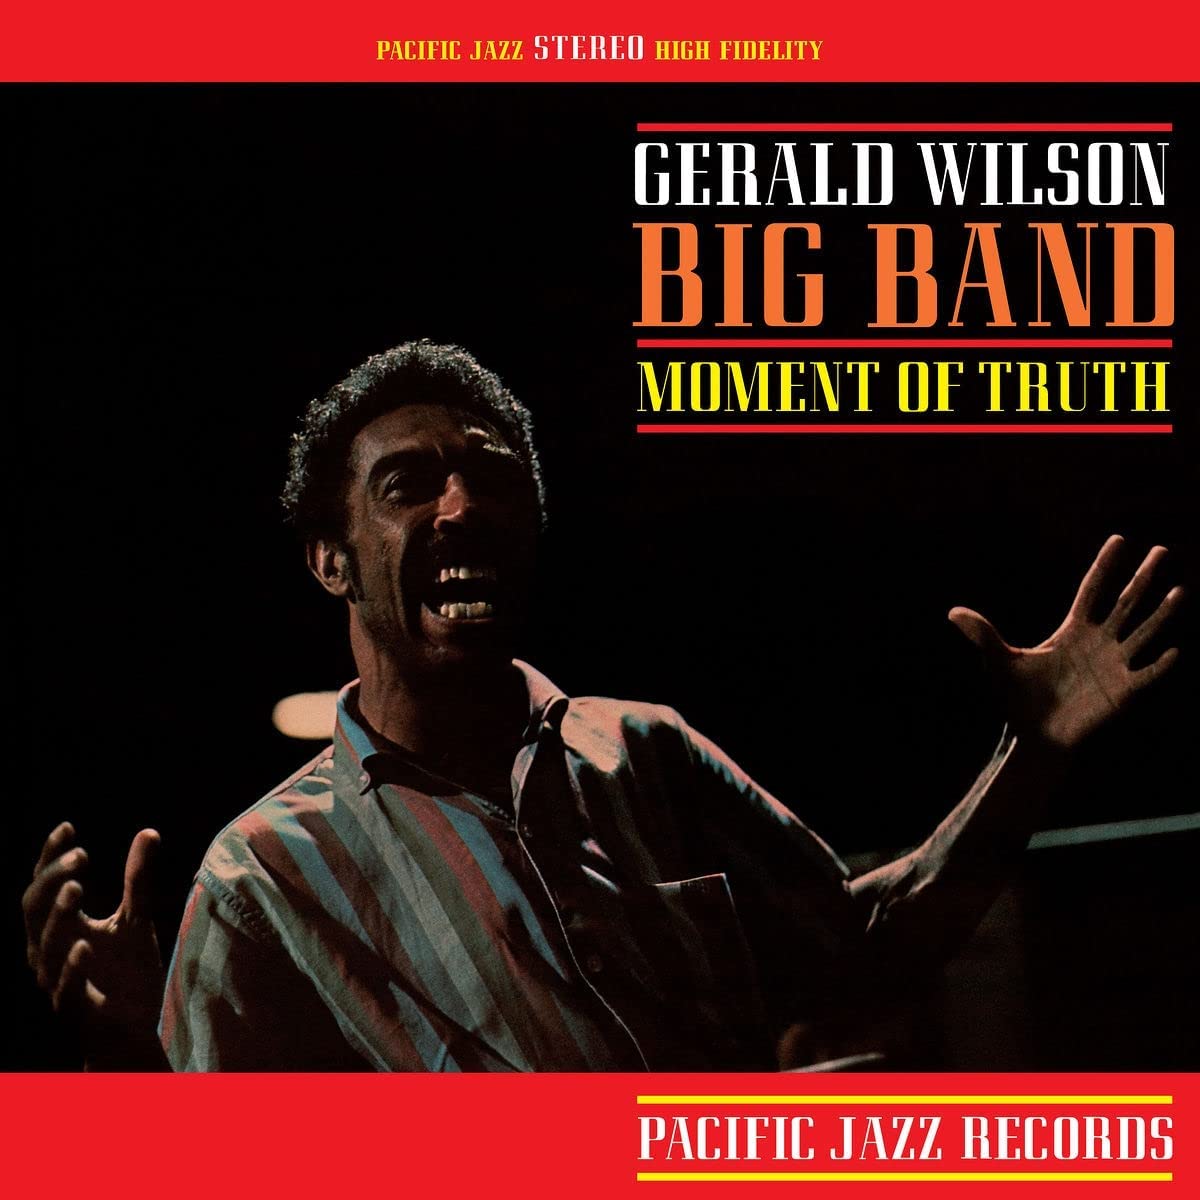 Gerald Wilson Big Band Moment Of Truth